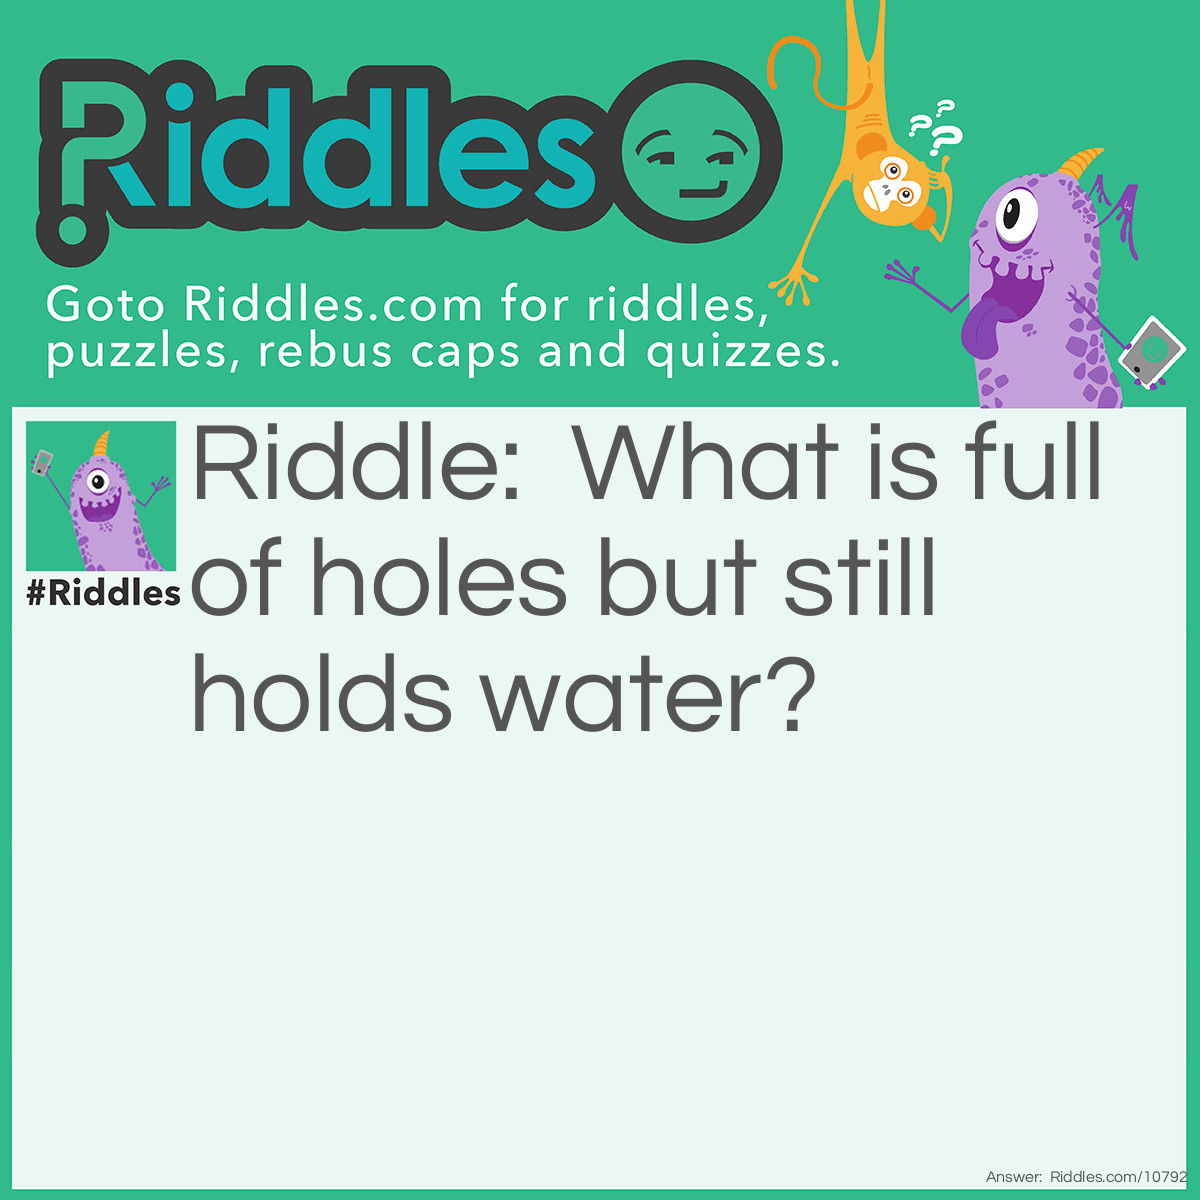 Riddle: What is full of holes but still holds water? Answer: A sponge.